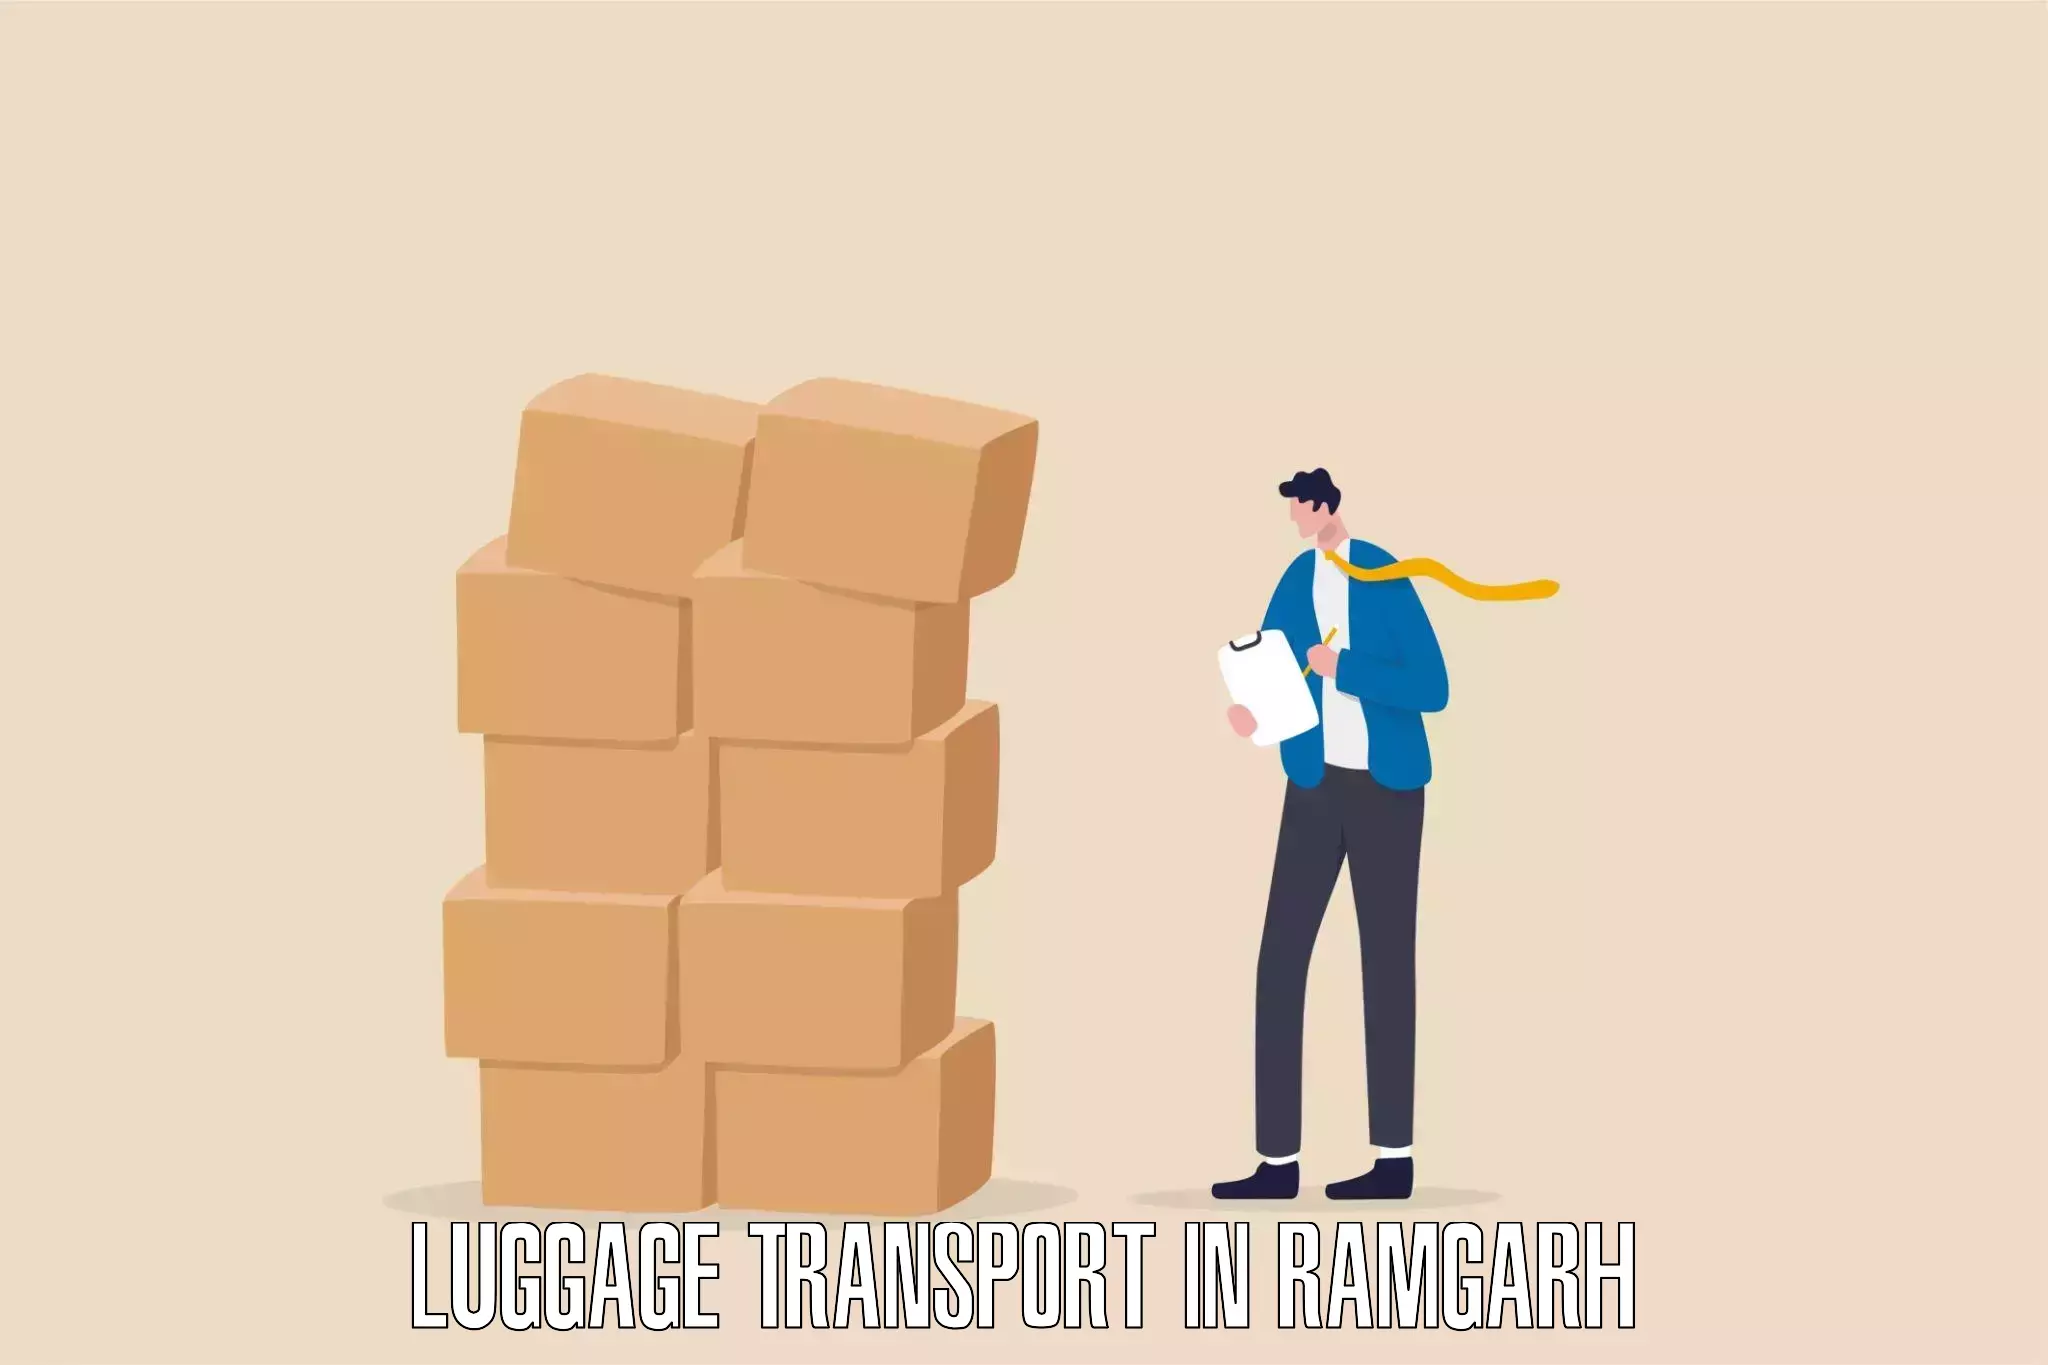 Luggage transport schedule in Ramgarh